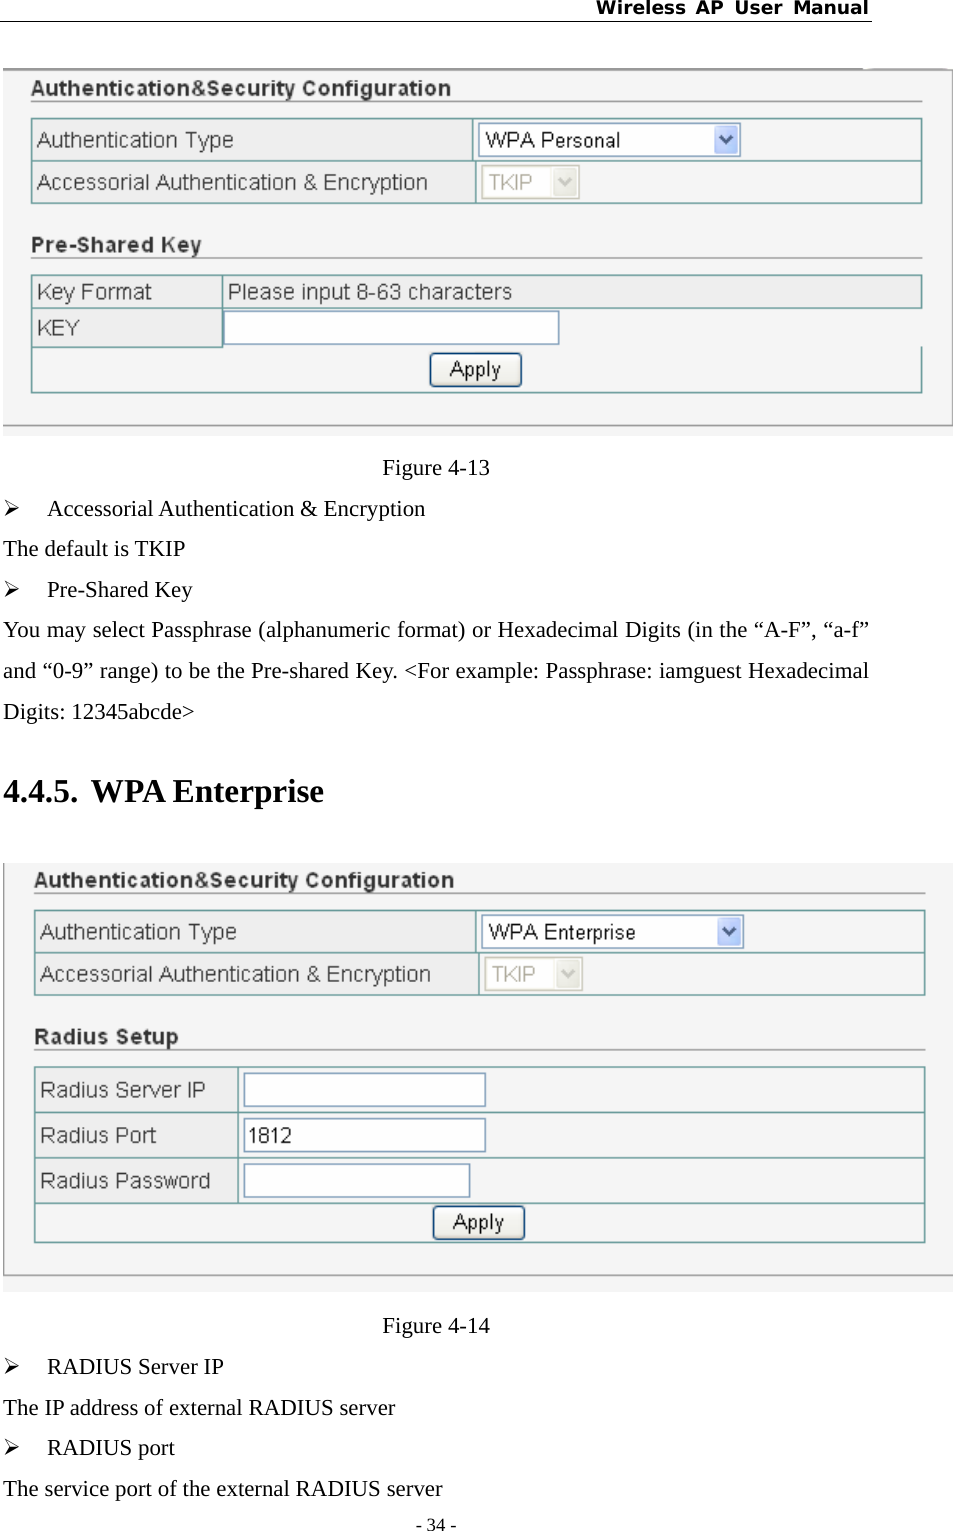 Wireless AP User Manual - 34 -   Figure 4-13 ¾ Accessorial Authentication &amp; Encryption The default is TKIP ¾ Pre-Shared Key You may select Passphrase (alphanumeric format) or Hexadecimal Digits (in the “A-F”, “a-f” and “0-9” range) to be the Pre-shared Key. &lt;For example: Passphrase: iamguest Hexadecimal Digits: 12345abcde&gt; 4.4.5. WPA Enterprise  Figure 4-14 ¾ RADIUS Server IP The IP address of external RADIUS server ¾ RADIUS port The service port of the external RADIUS server 